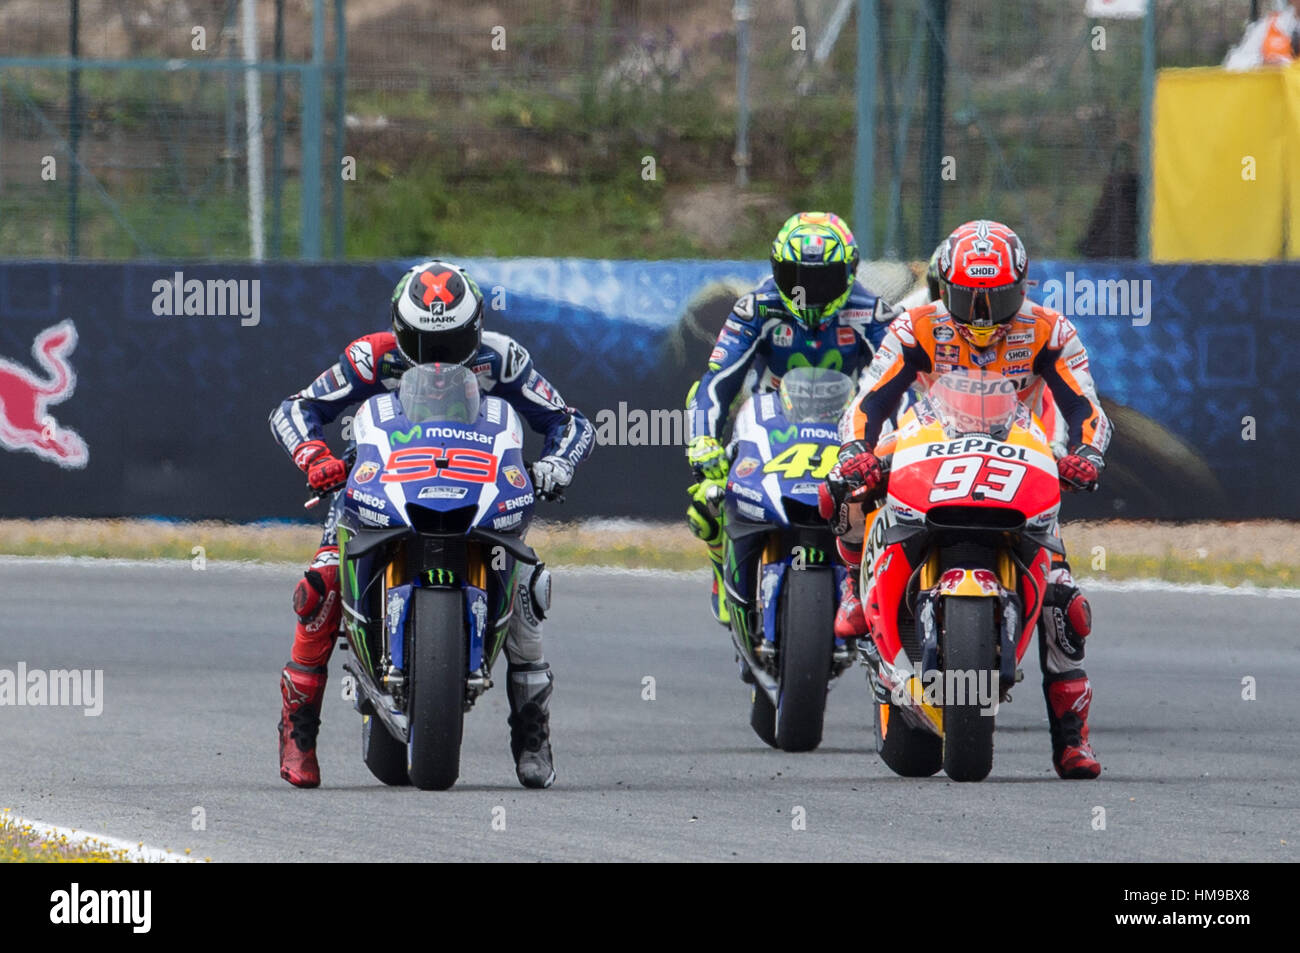 Jorge Lorenzo, Marc Marquez and Valentino Rossi during the qualifying in  Motorcycle Championship GP, in Jerez, Spain. April 23, 2016 Stock Photo -  Alamy